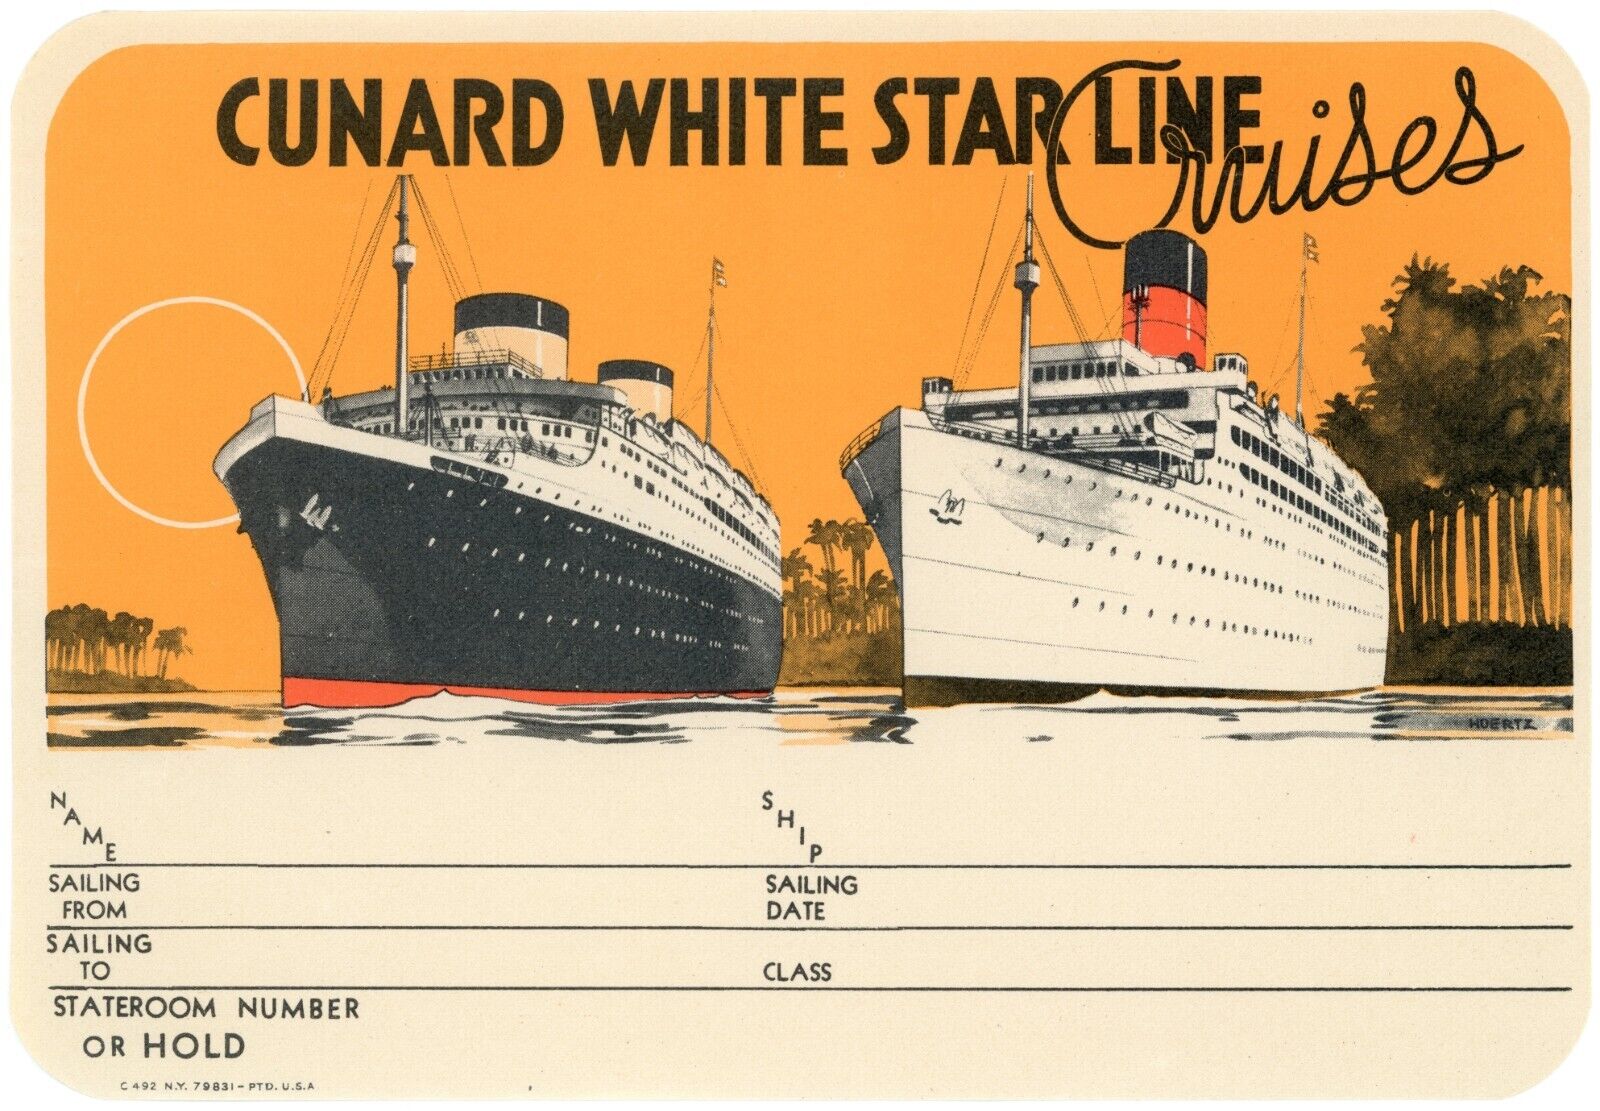 1930s Luggage Label CUNARD WHITE STAR LINE CRUISES Exceptional Condition 1937